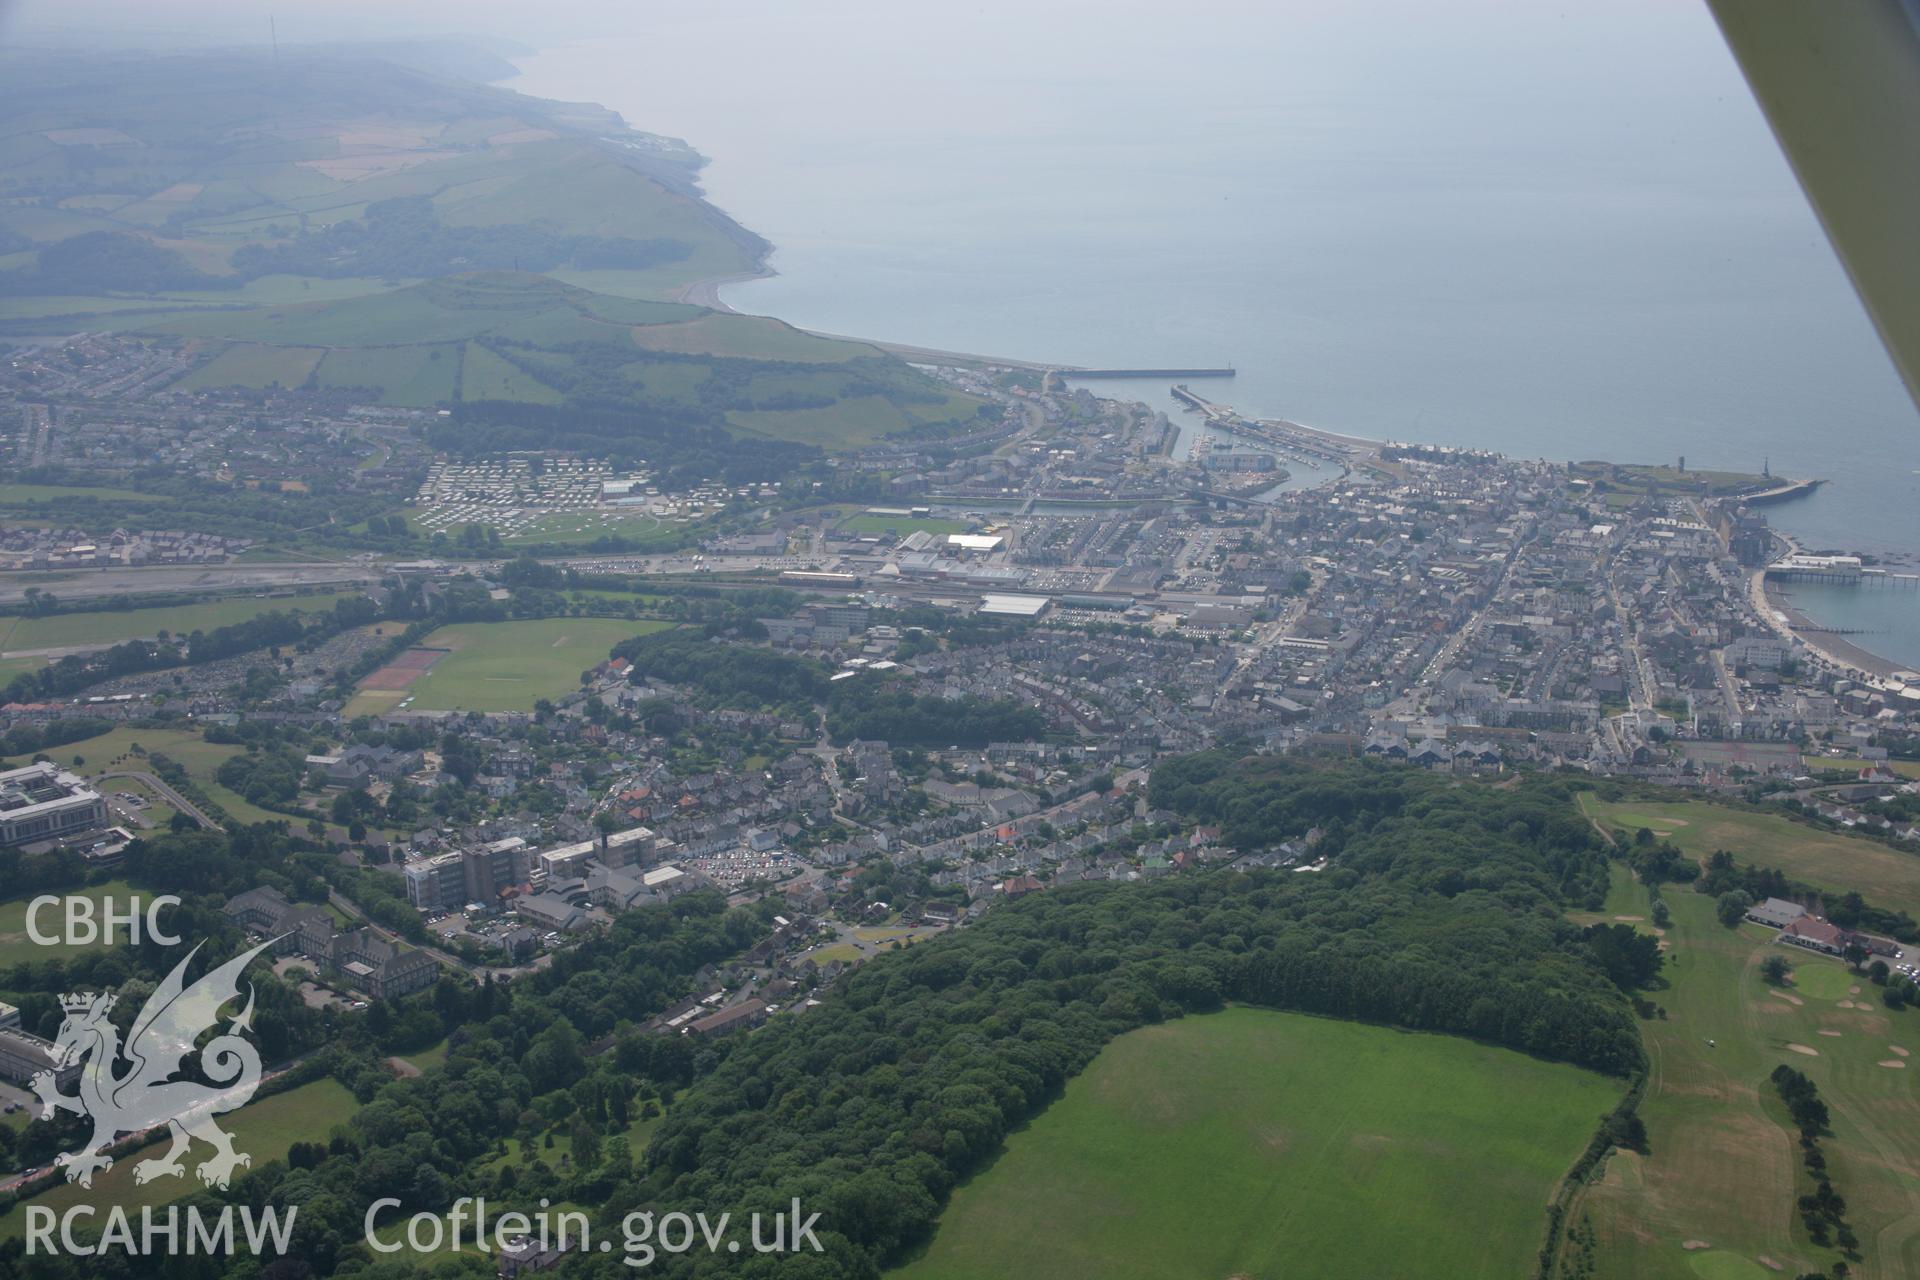 RCAHMW colour oblique aerial photograph of Aberystwyth. Taken on 04 July 2006 by Toby Driver.